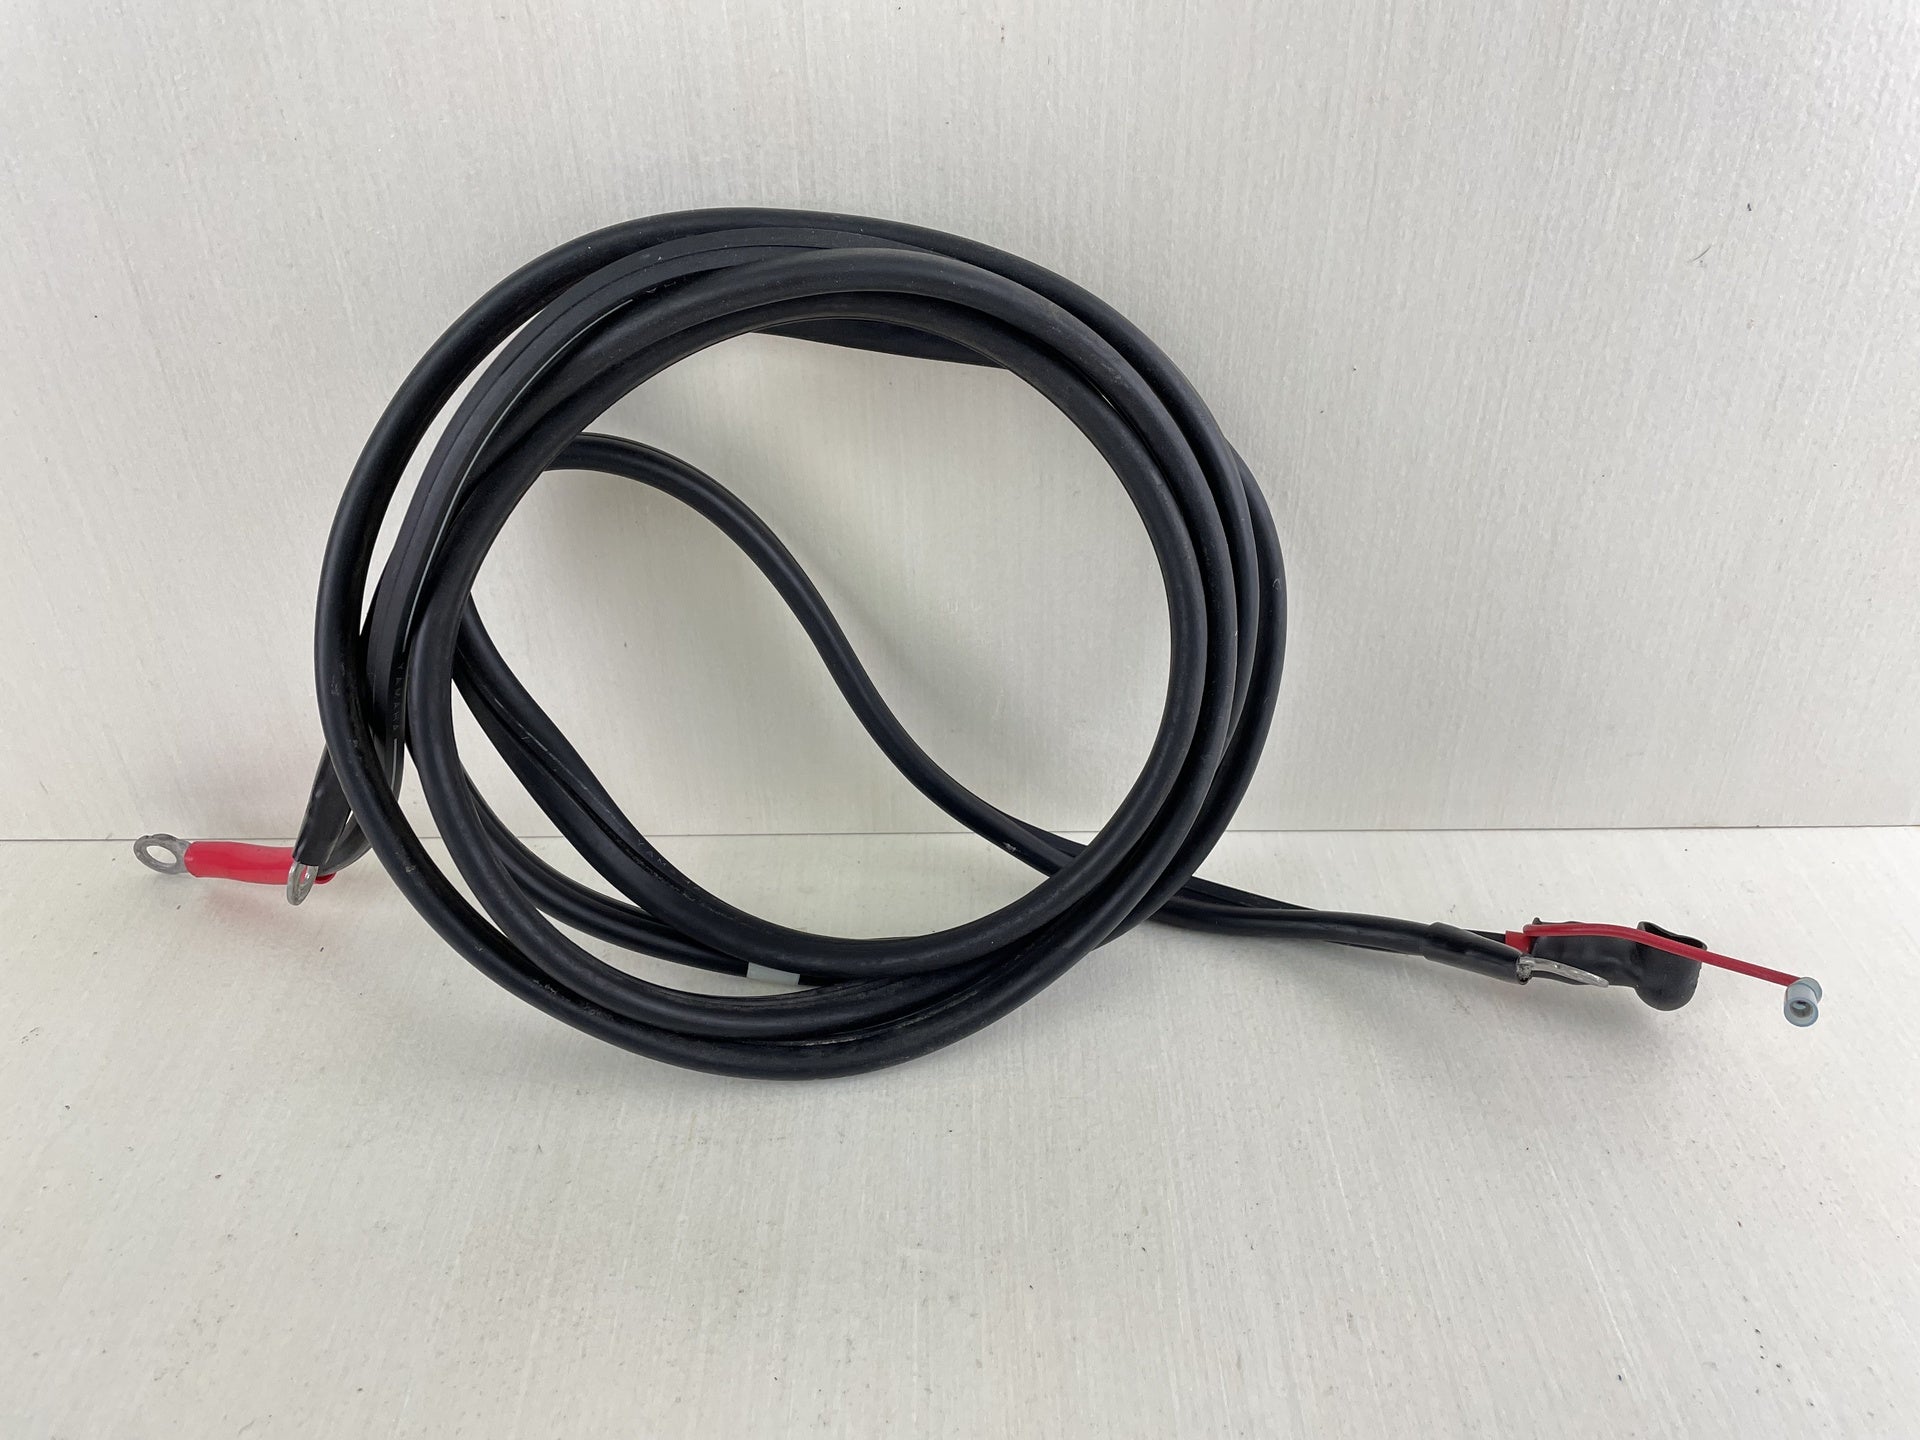 01-2005 Yamaha 30 40 HP 4 Stroke Outboard Starter Battery Cable 67C-82105-J2-00